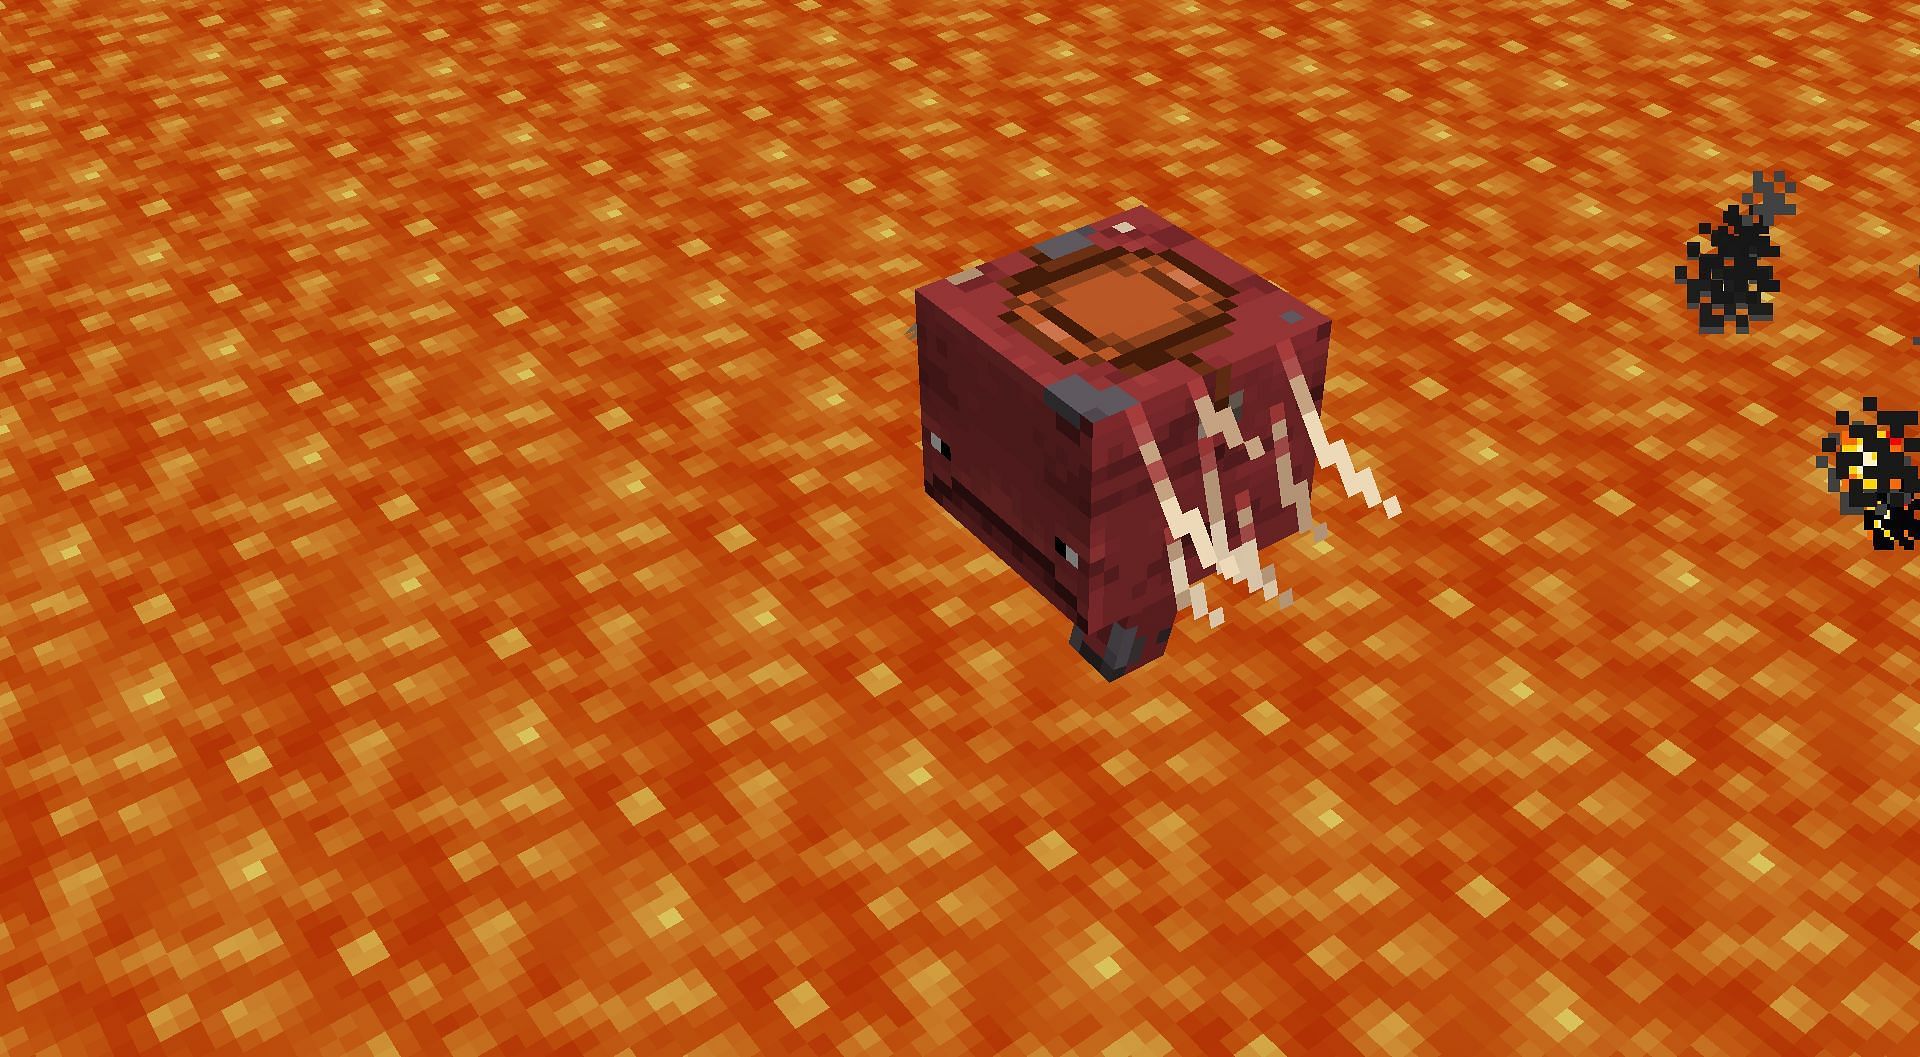 Striders can be ridden over lava (Image via Mojang)